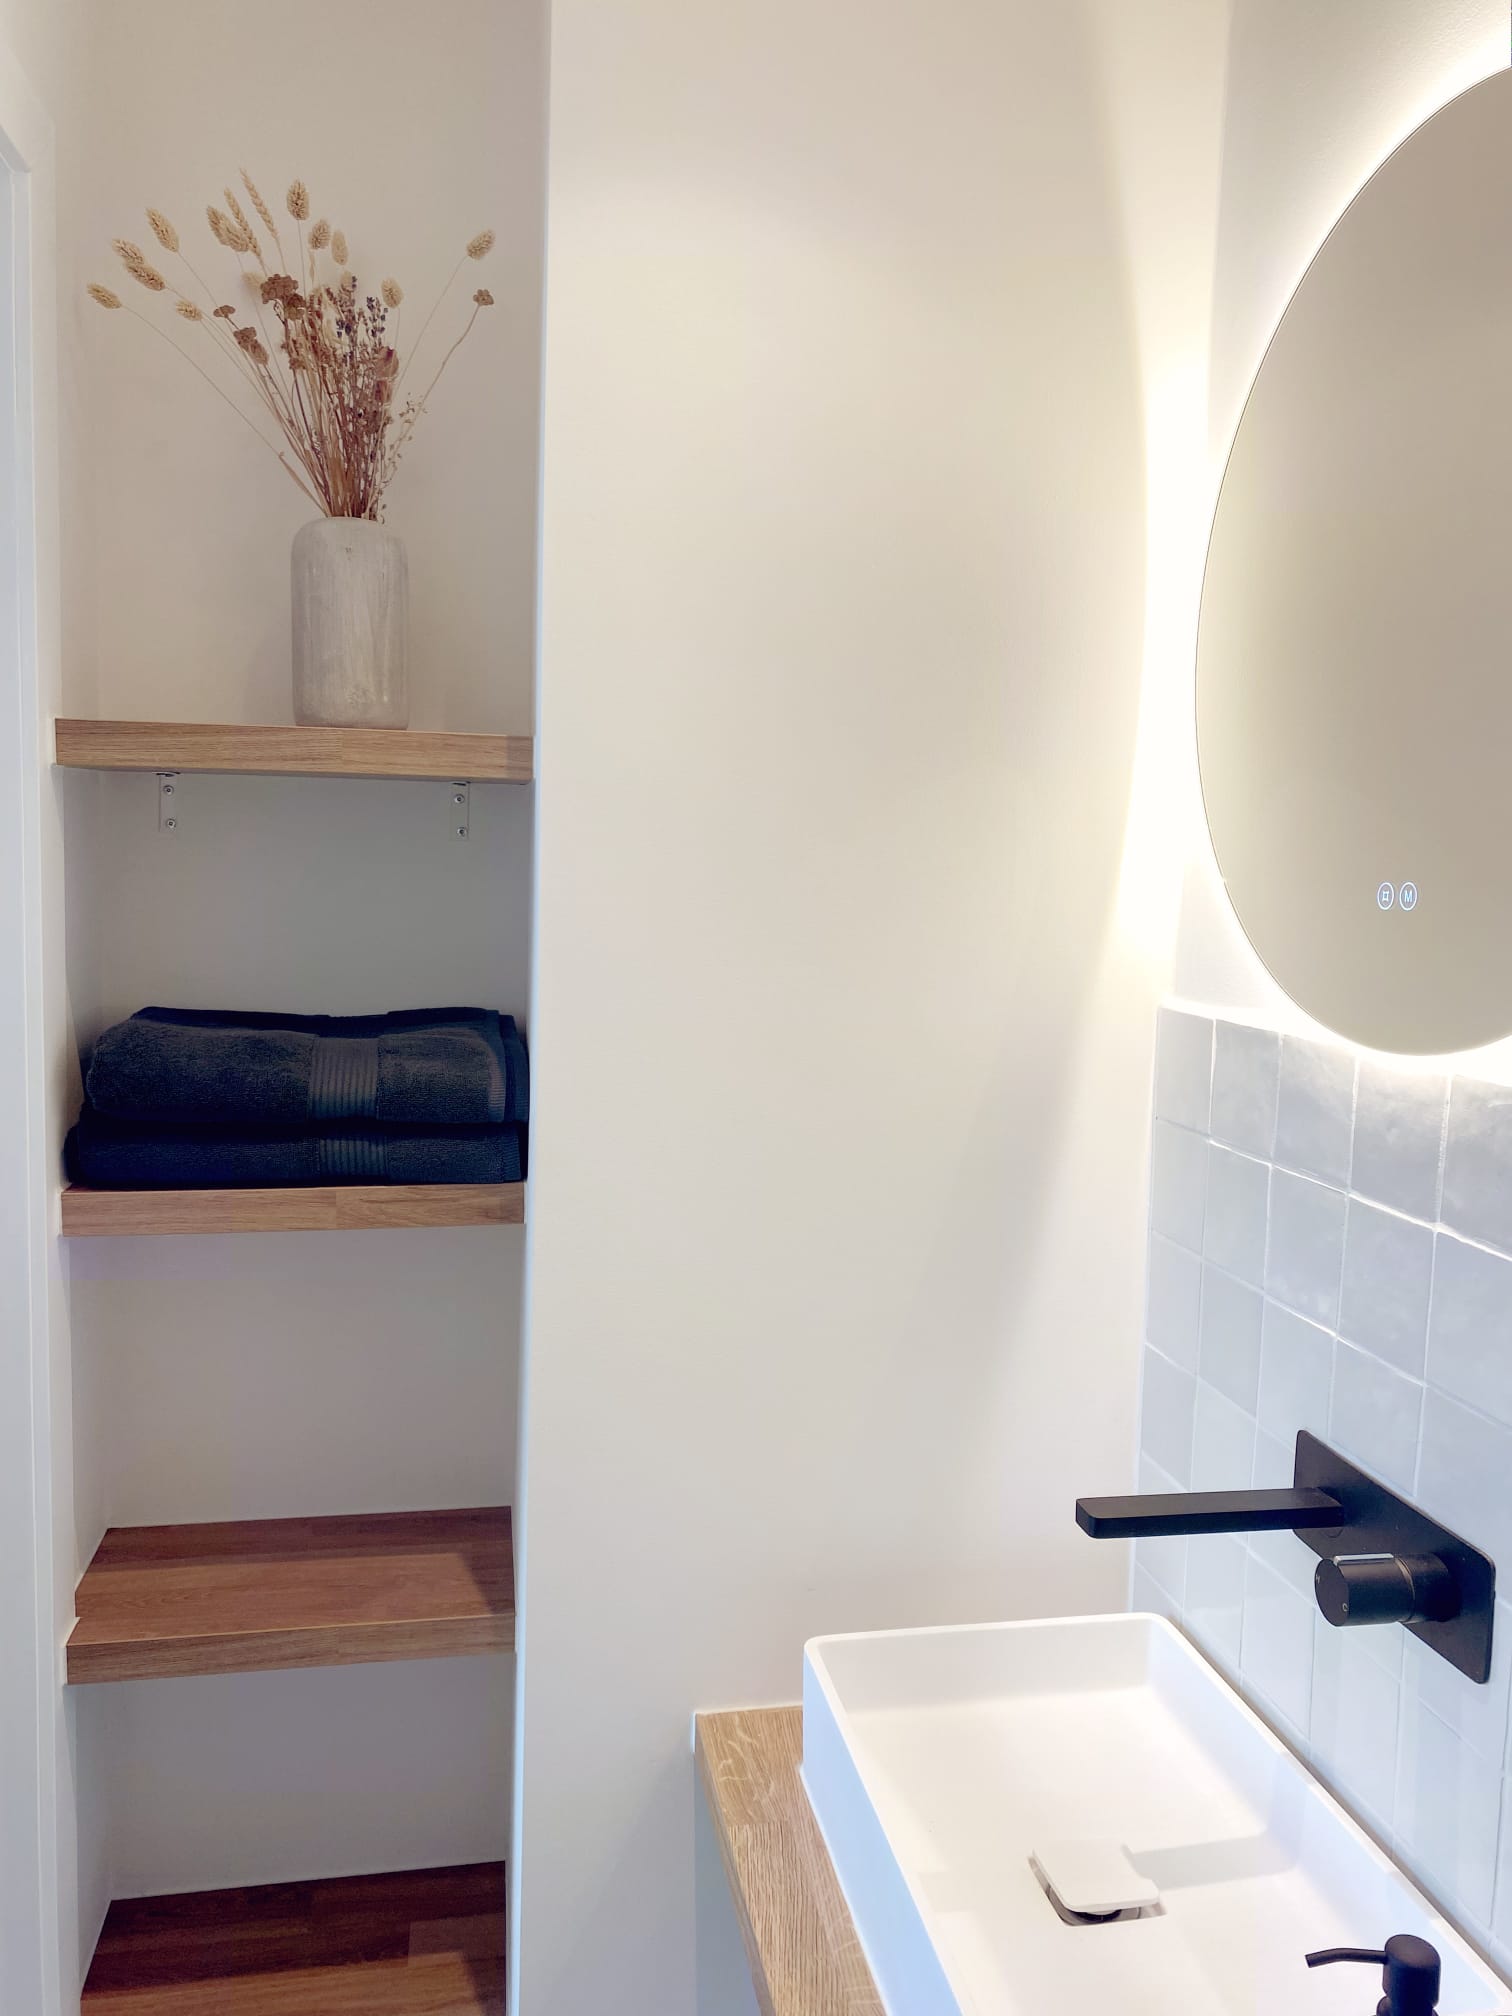 apartment for rent near brussels - bathroom